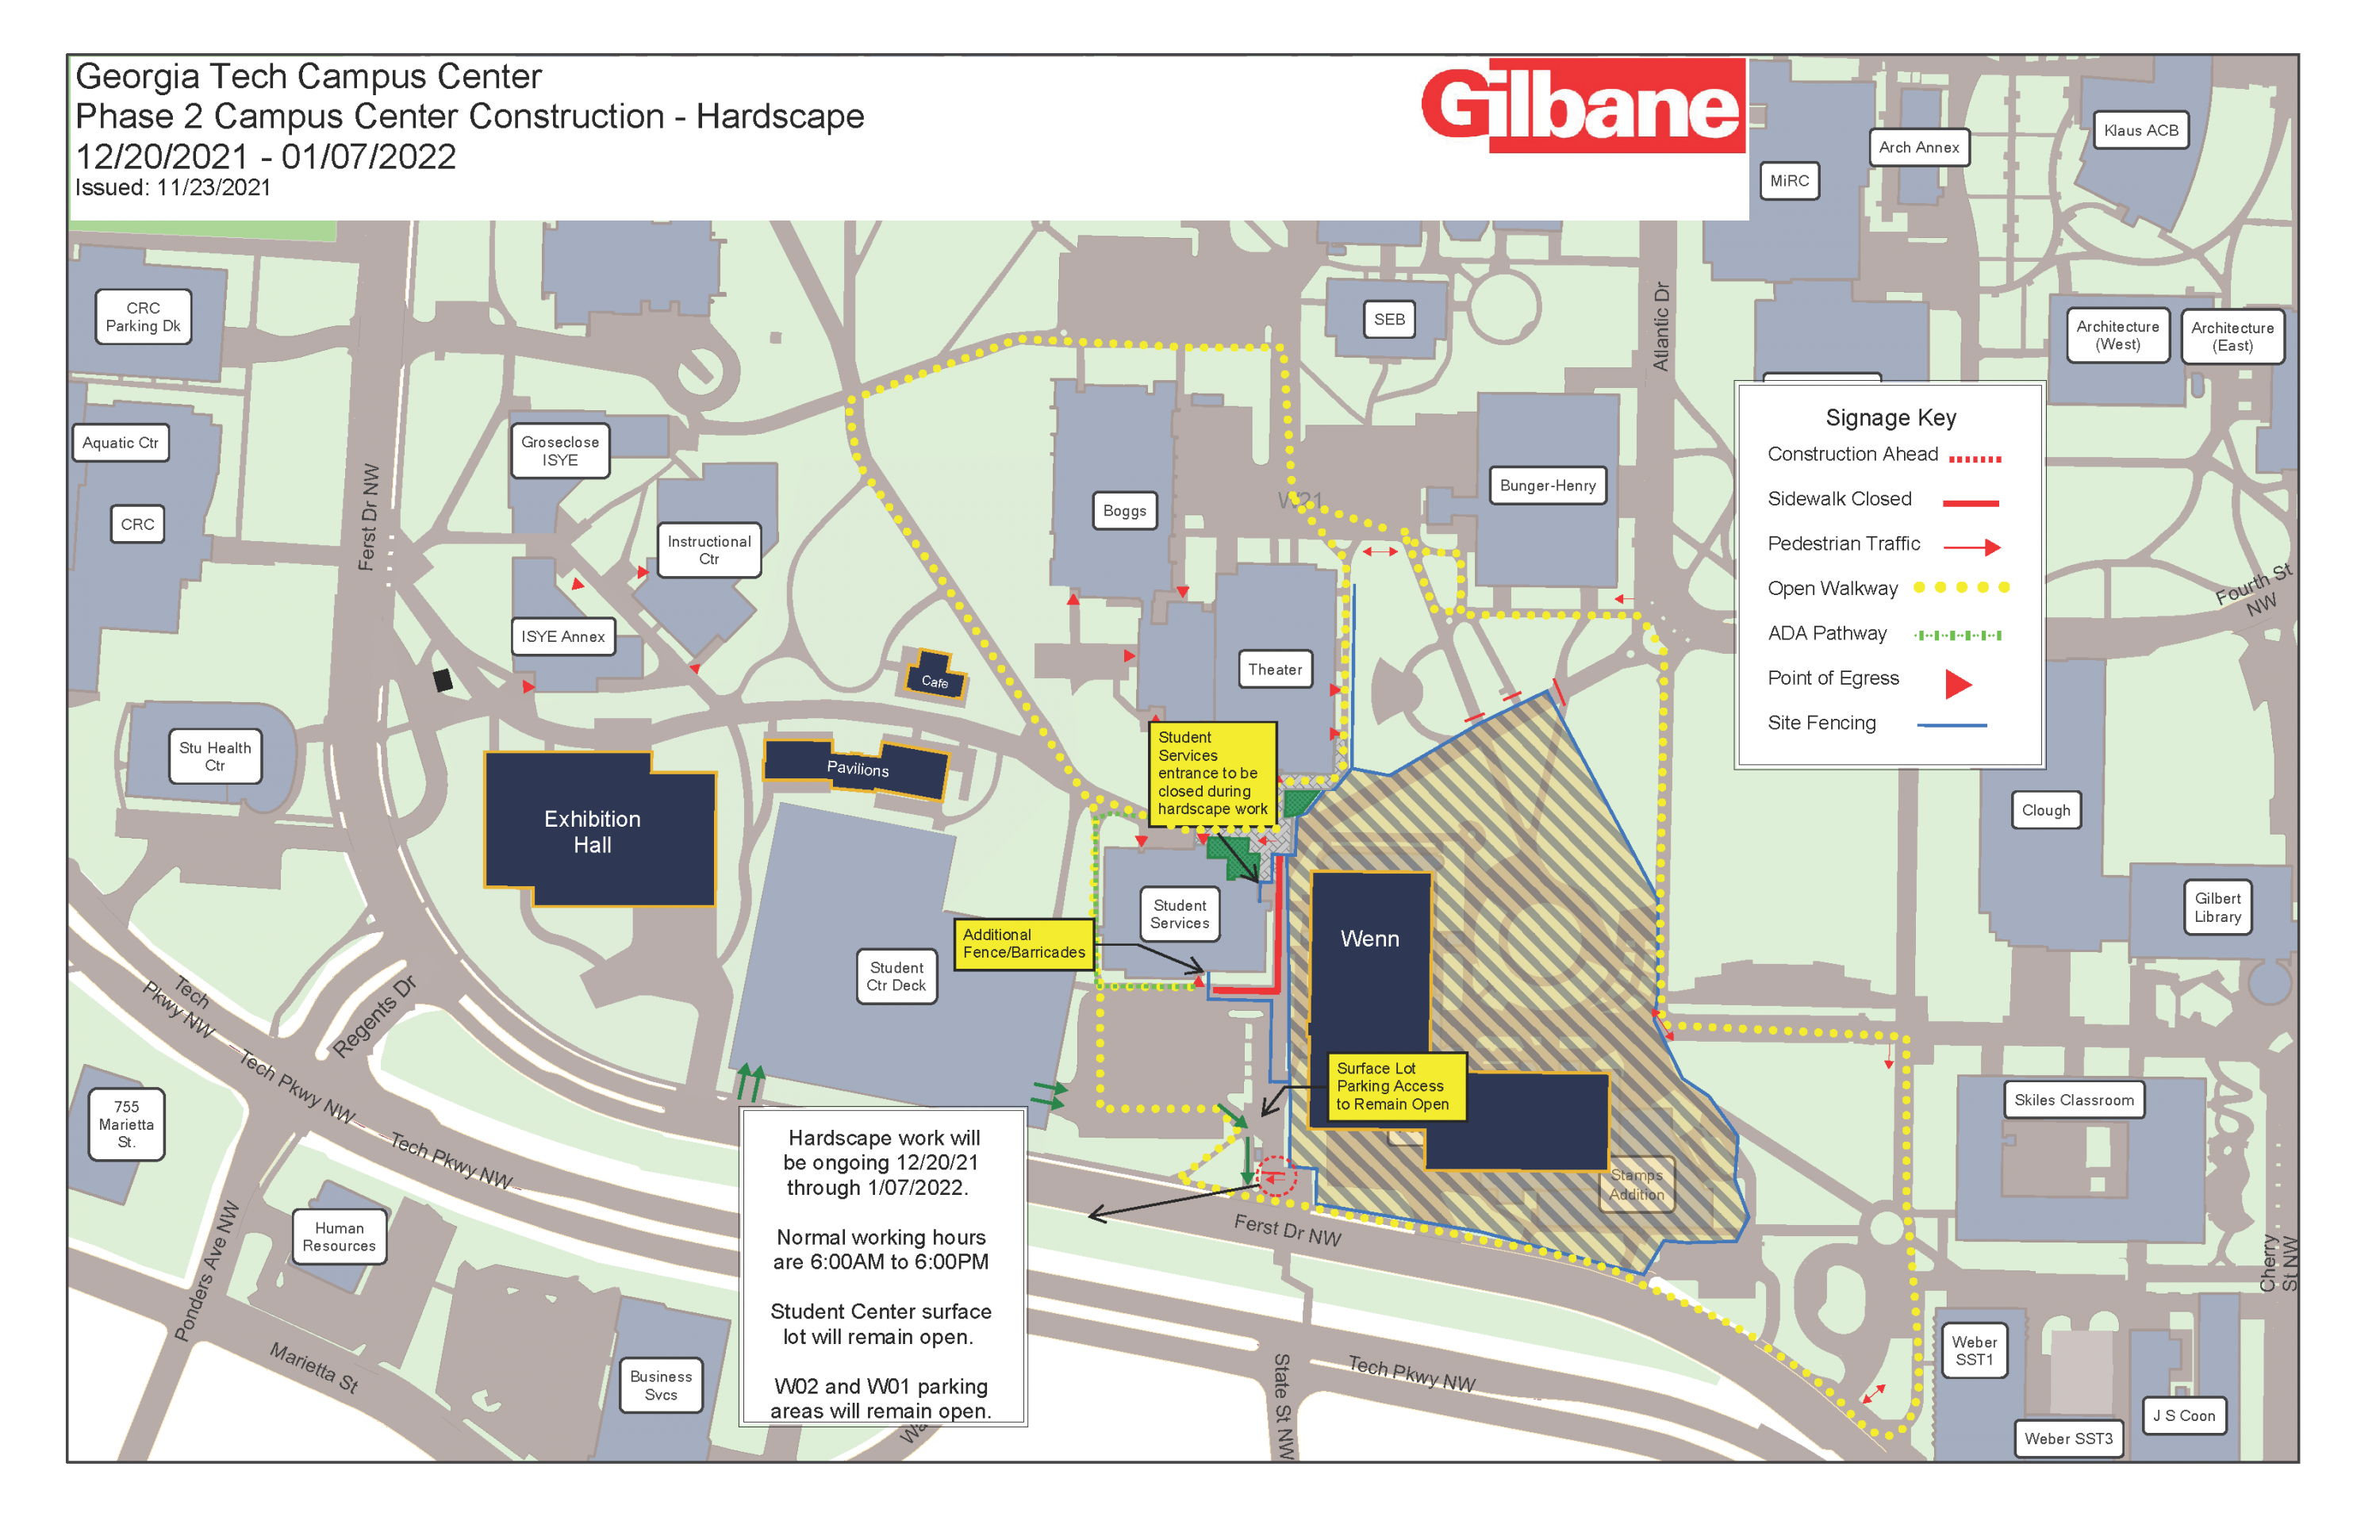 pic of site logistics for campus center construction December 2021 - January 2022.